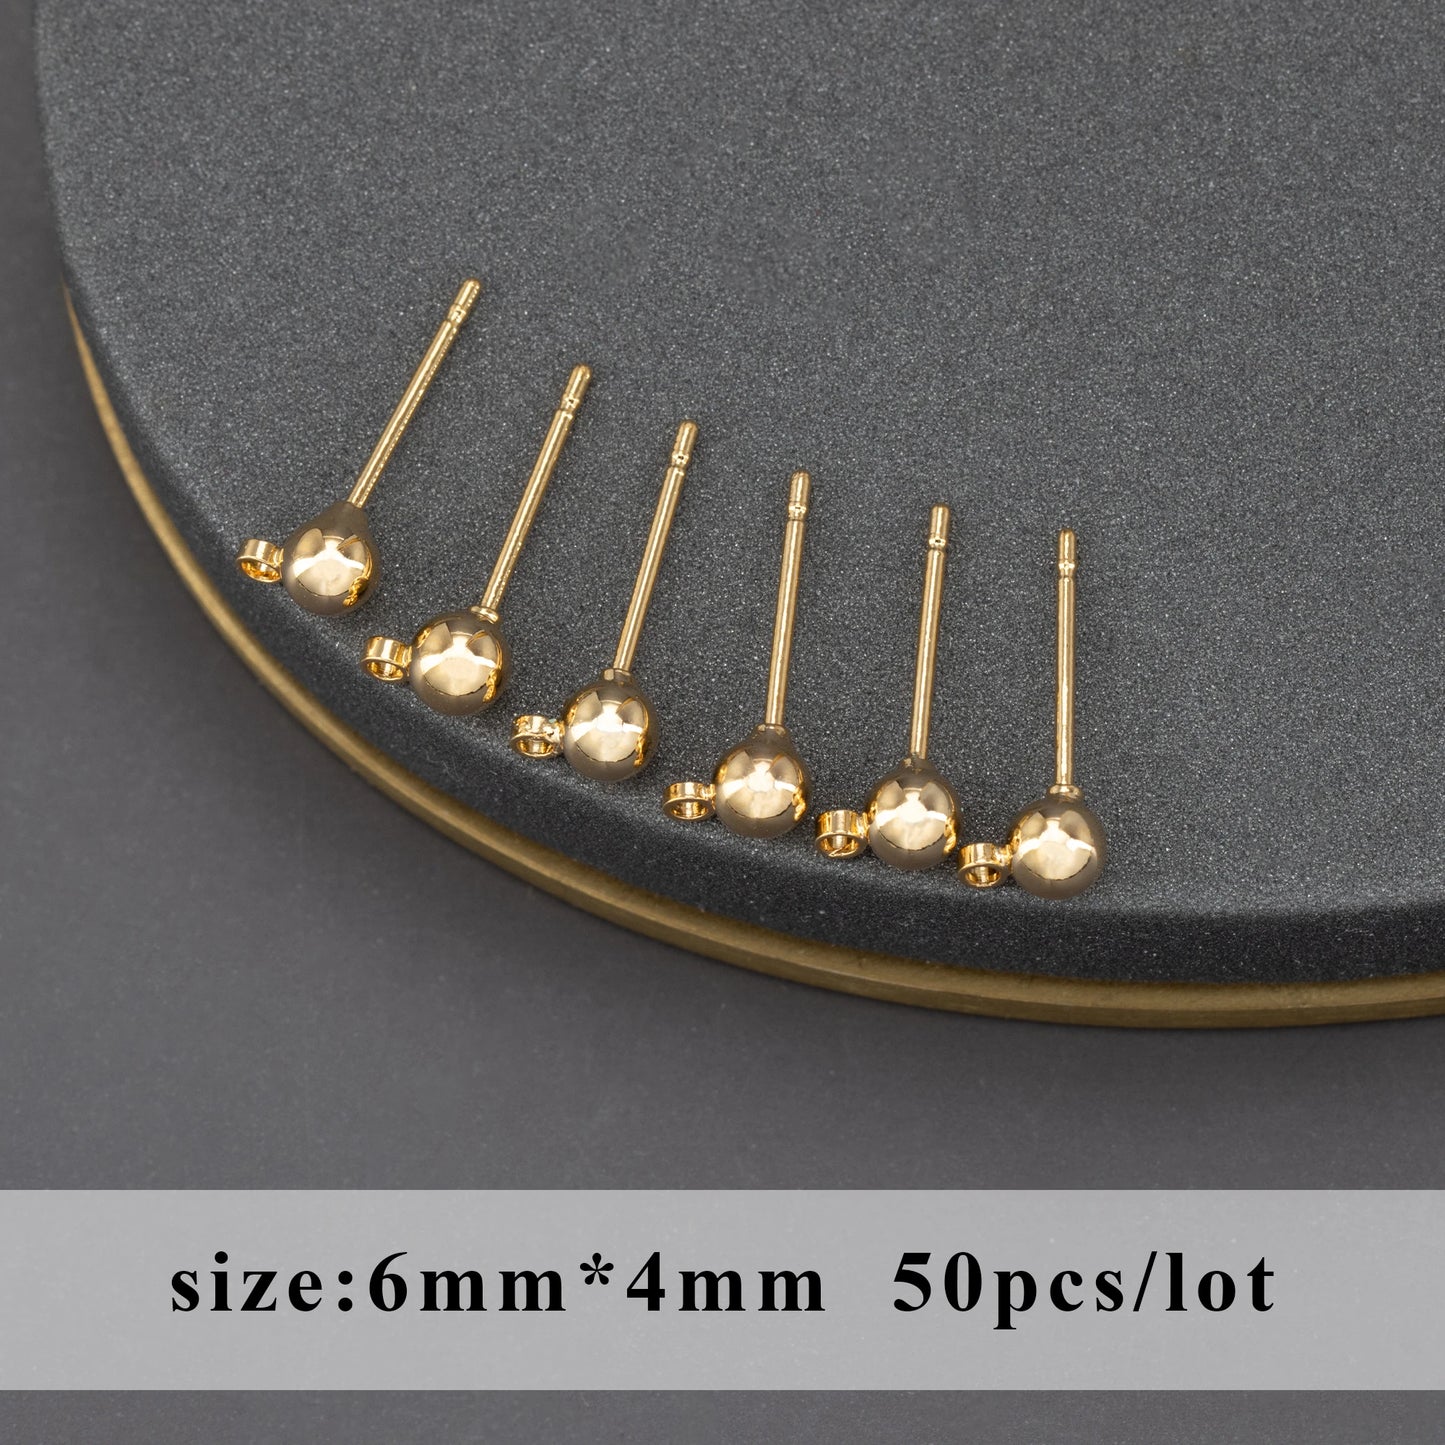 GUFEATHER M575,jewelry accessories,18k gold plated,copper,pass REACH,nickel free,stud earring,jewelry making findings,100pcs/lot